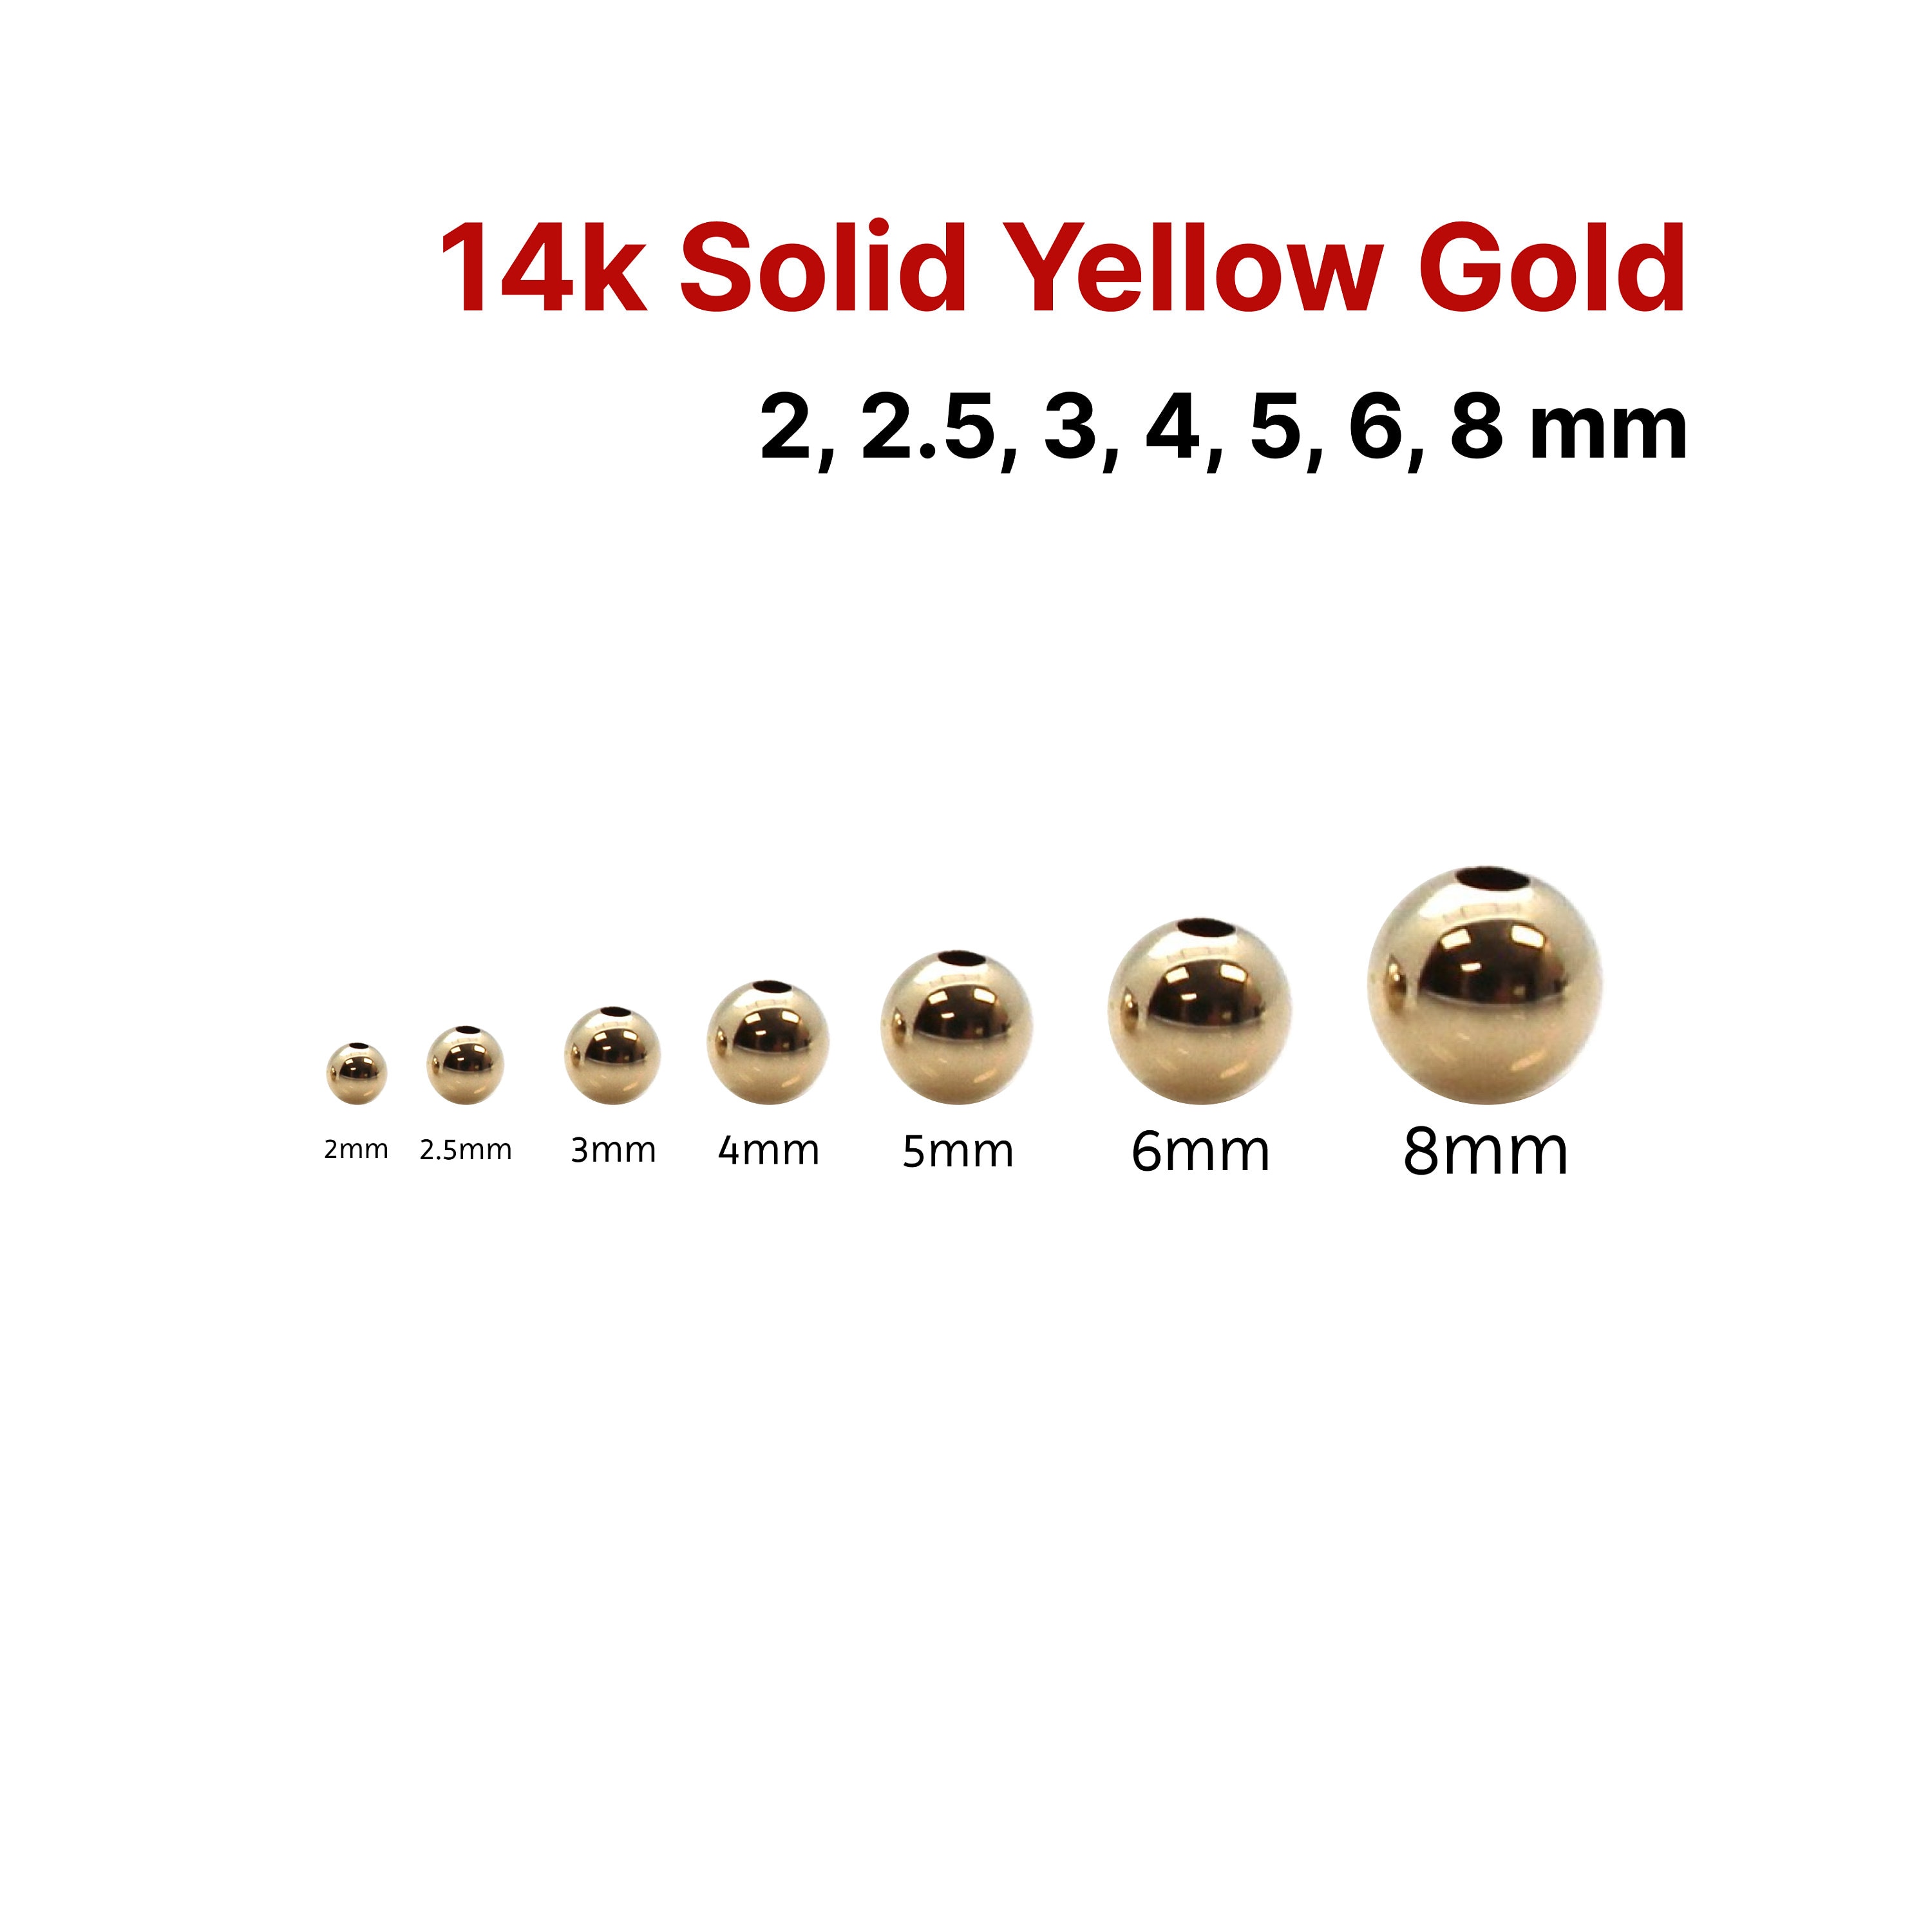 3 Size 14K Gold Plated Beads 180pcs 3mm 4mm 6mm Smooth Round Metal Spacer Beads Seamless Gold Ball Brass Beads for Jewelry Making Bracelet, Adult